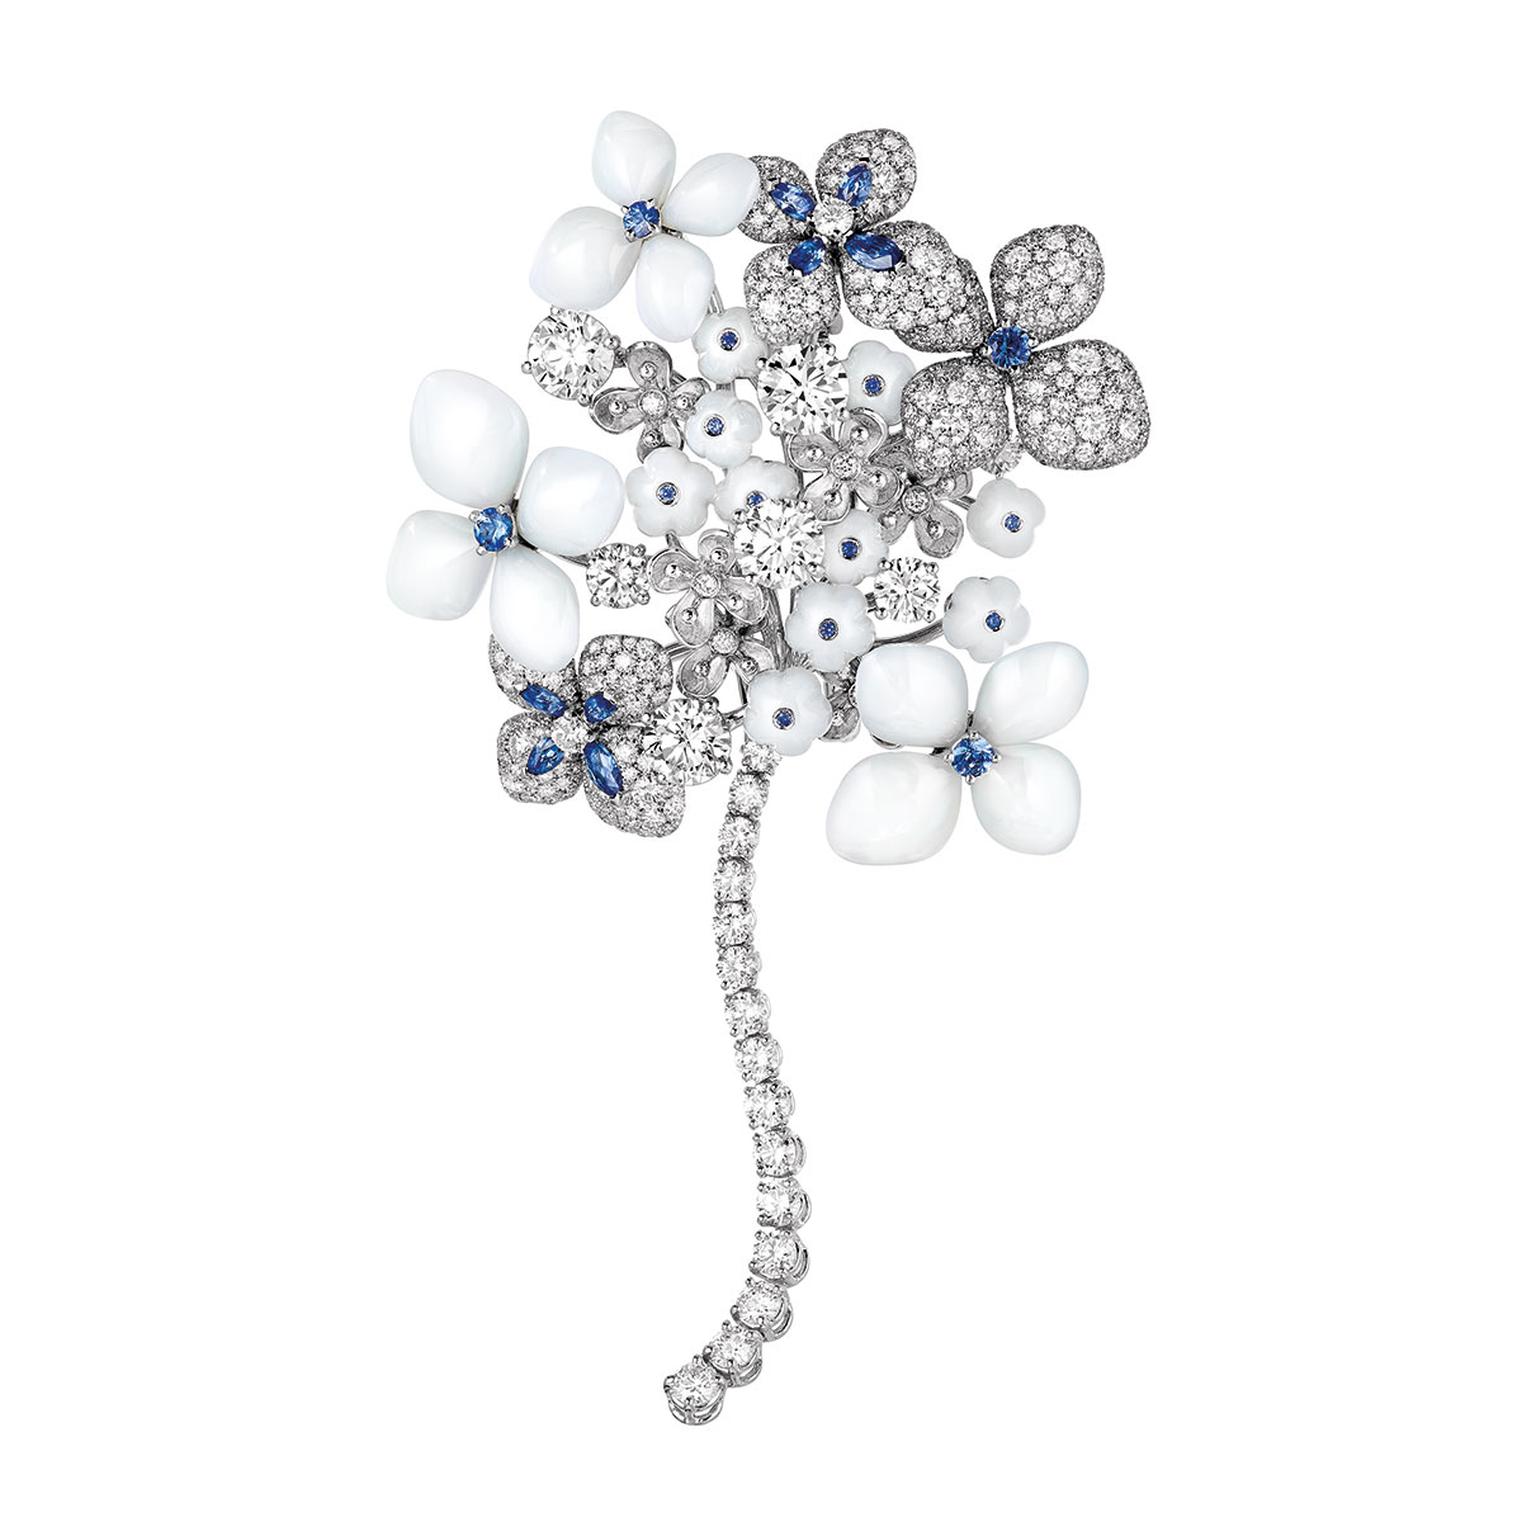 Chaumet jewellery: step into the magical Hortensia garden of high jewellery